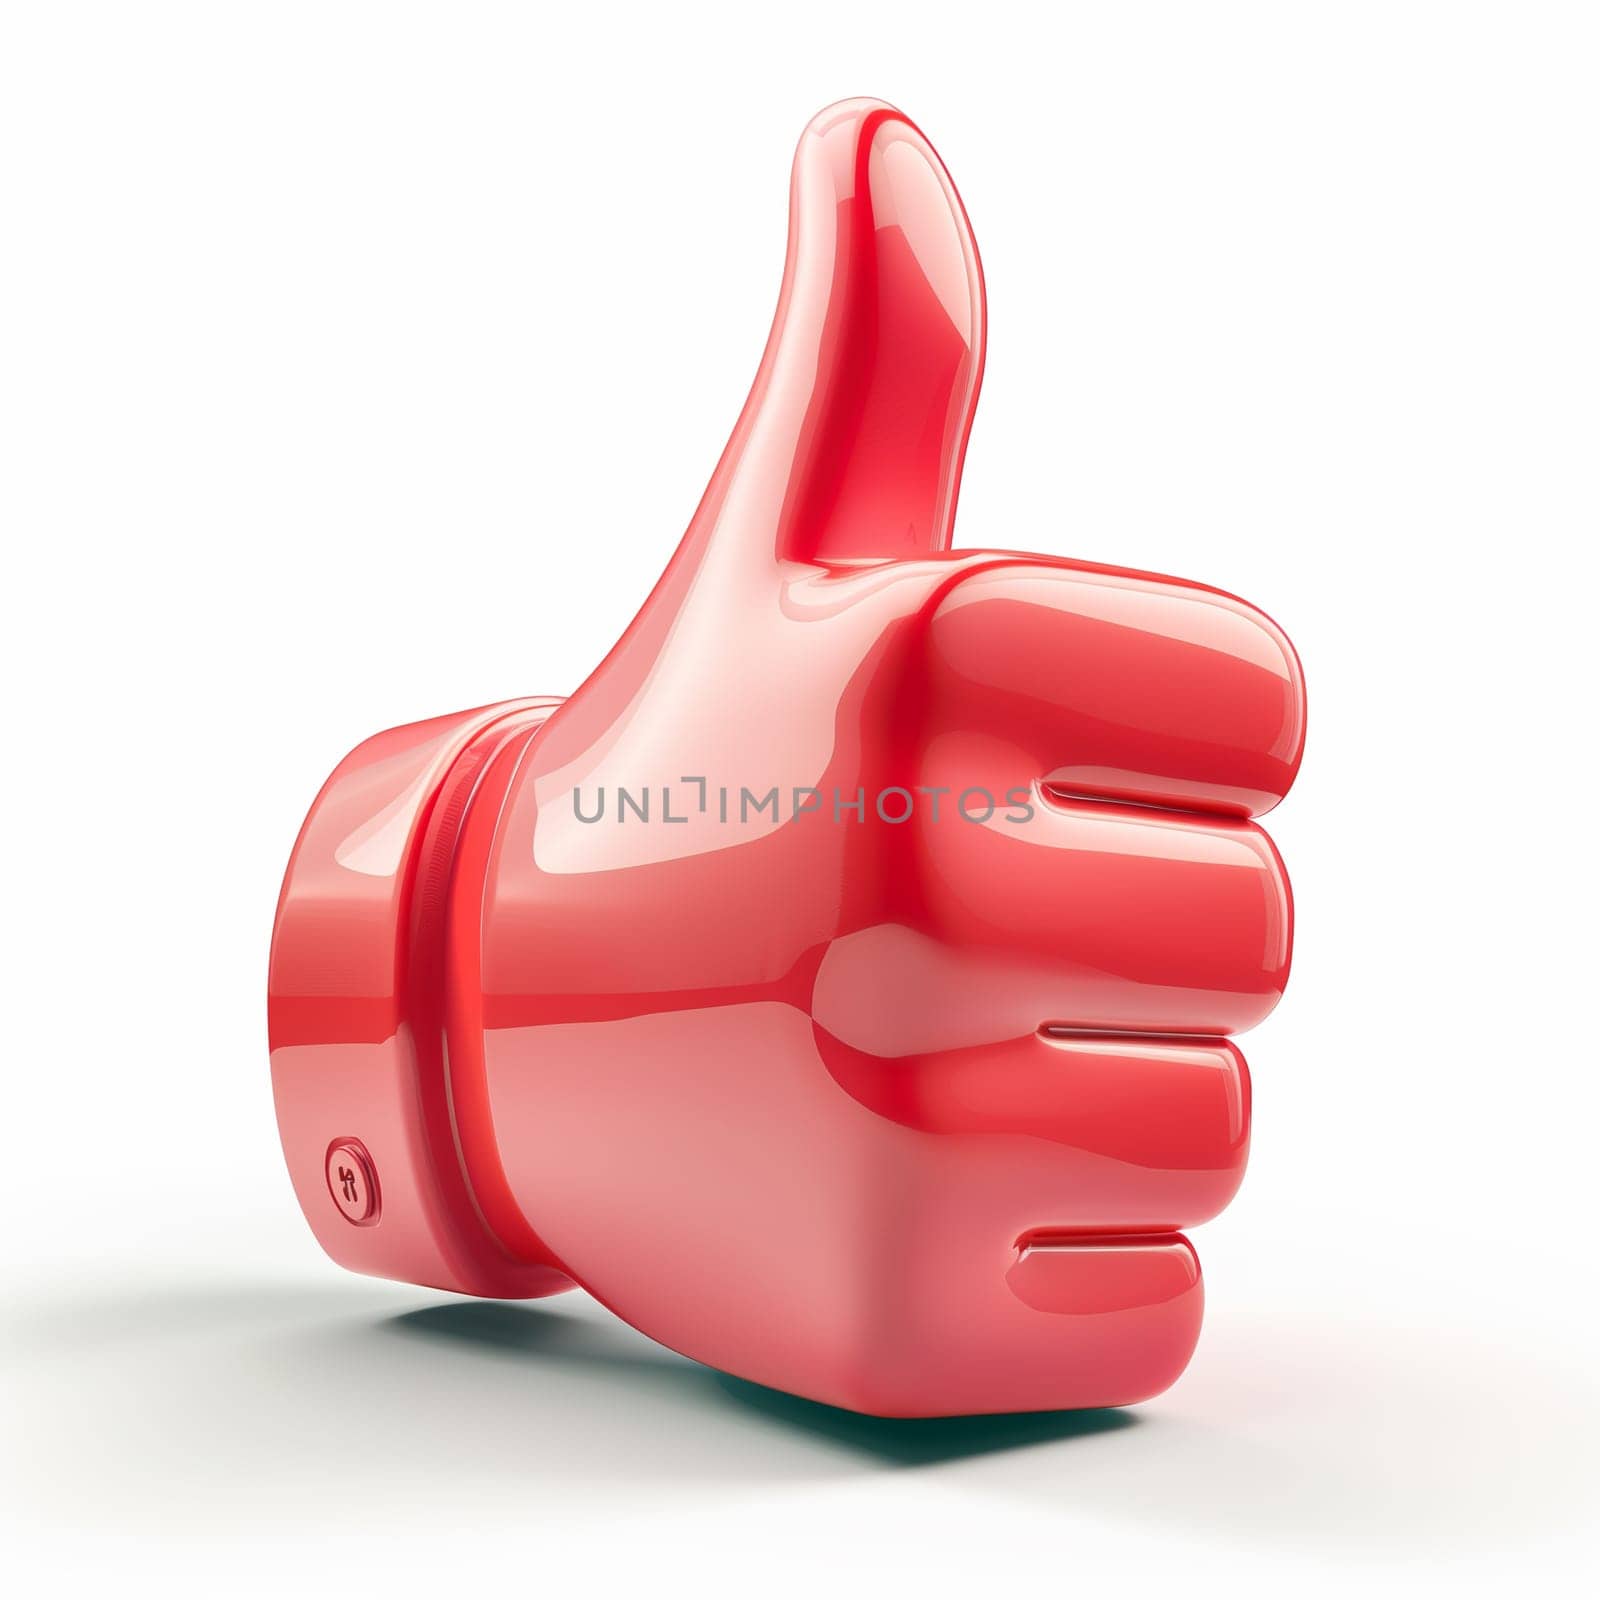 Red Plastic Thumbs Up Sign on White Background by Sd28DimoN_1976